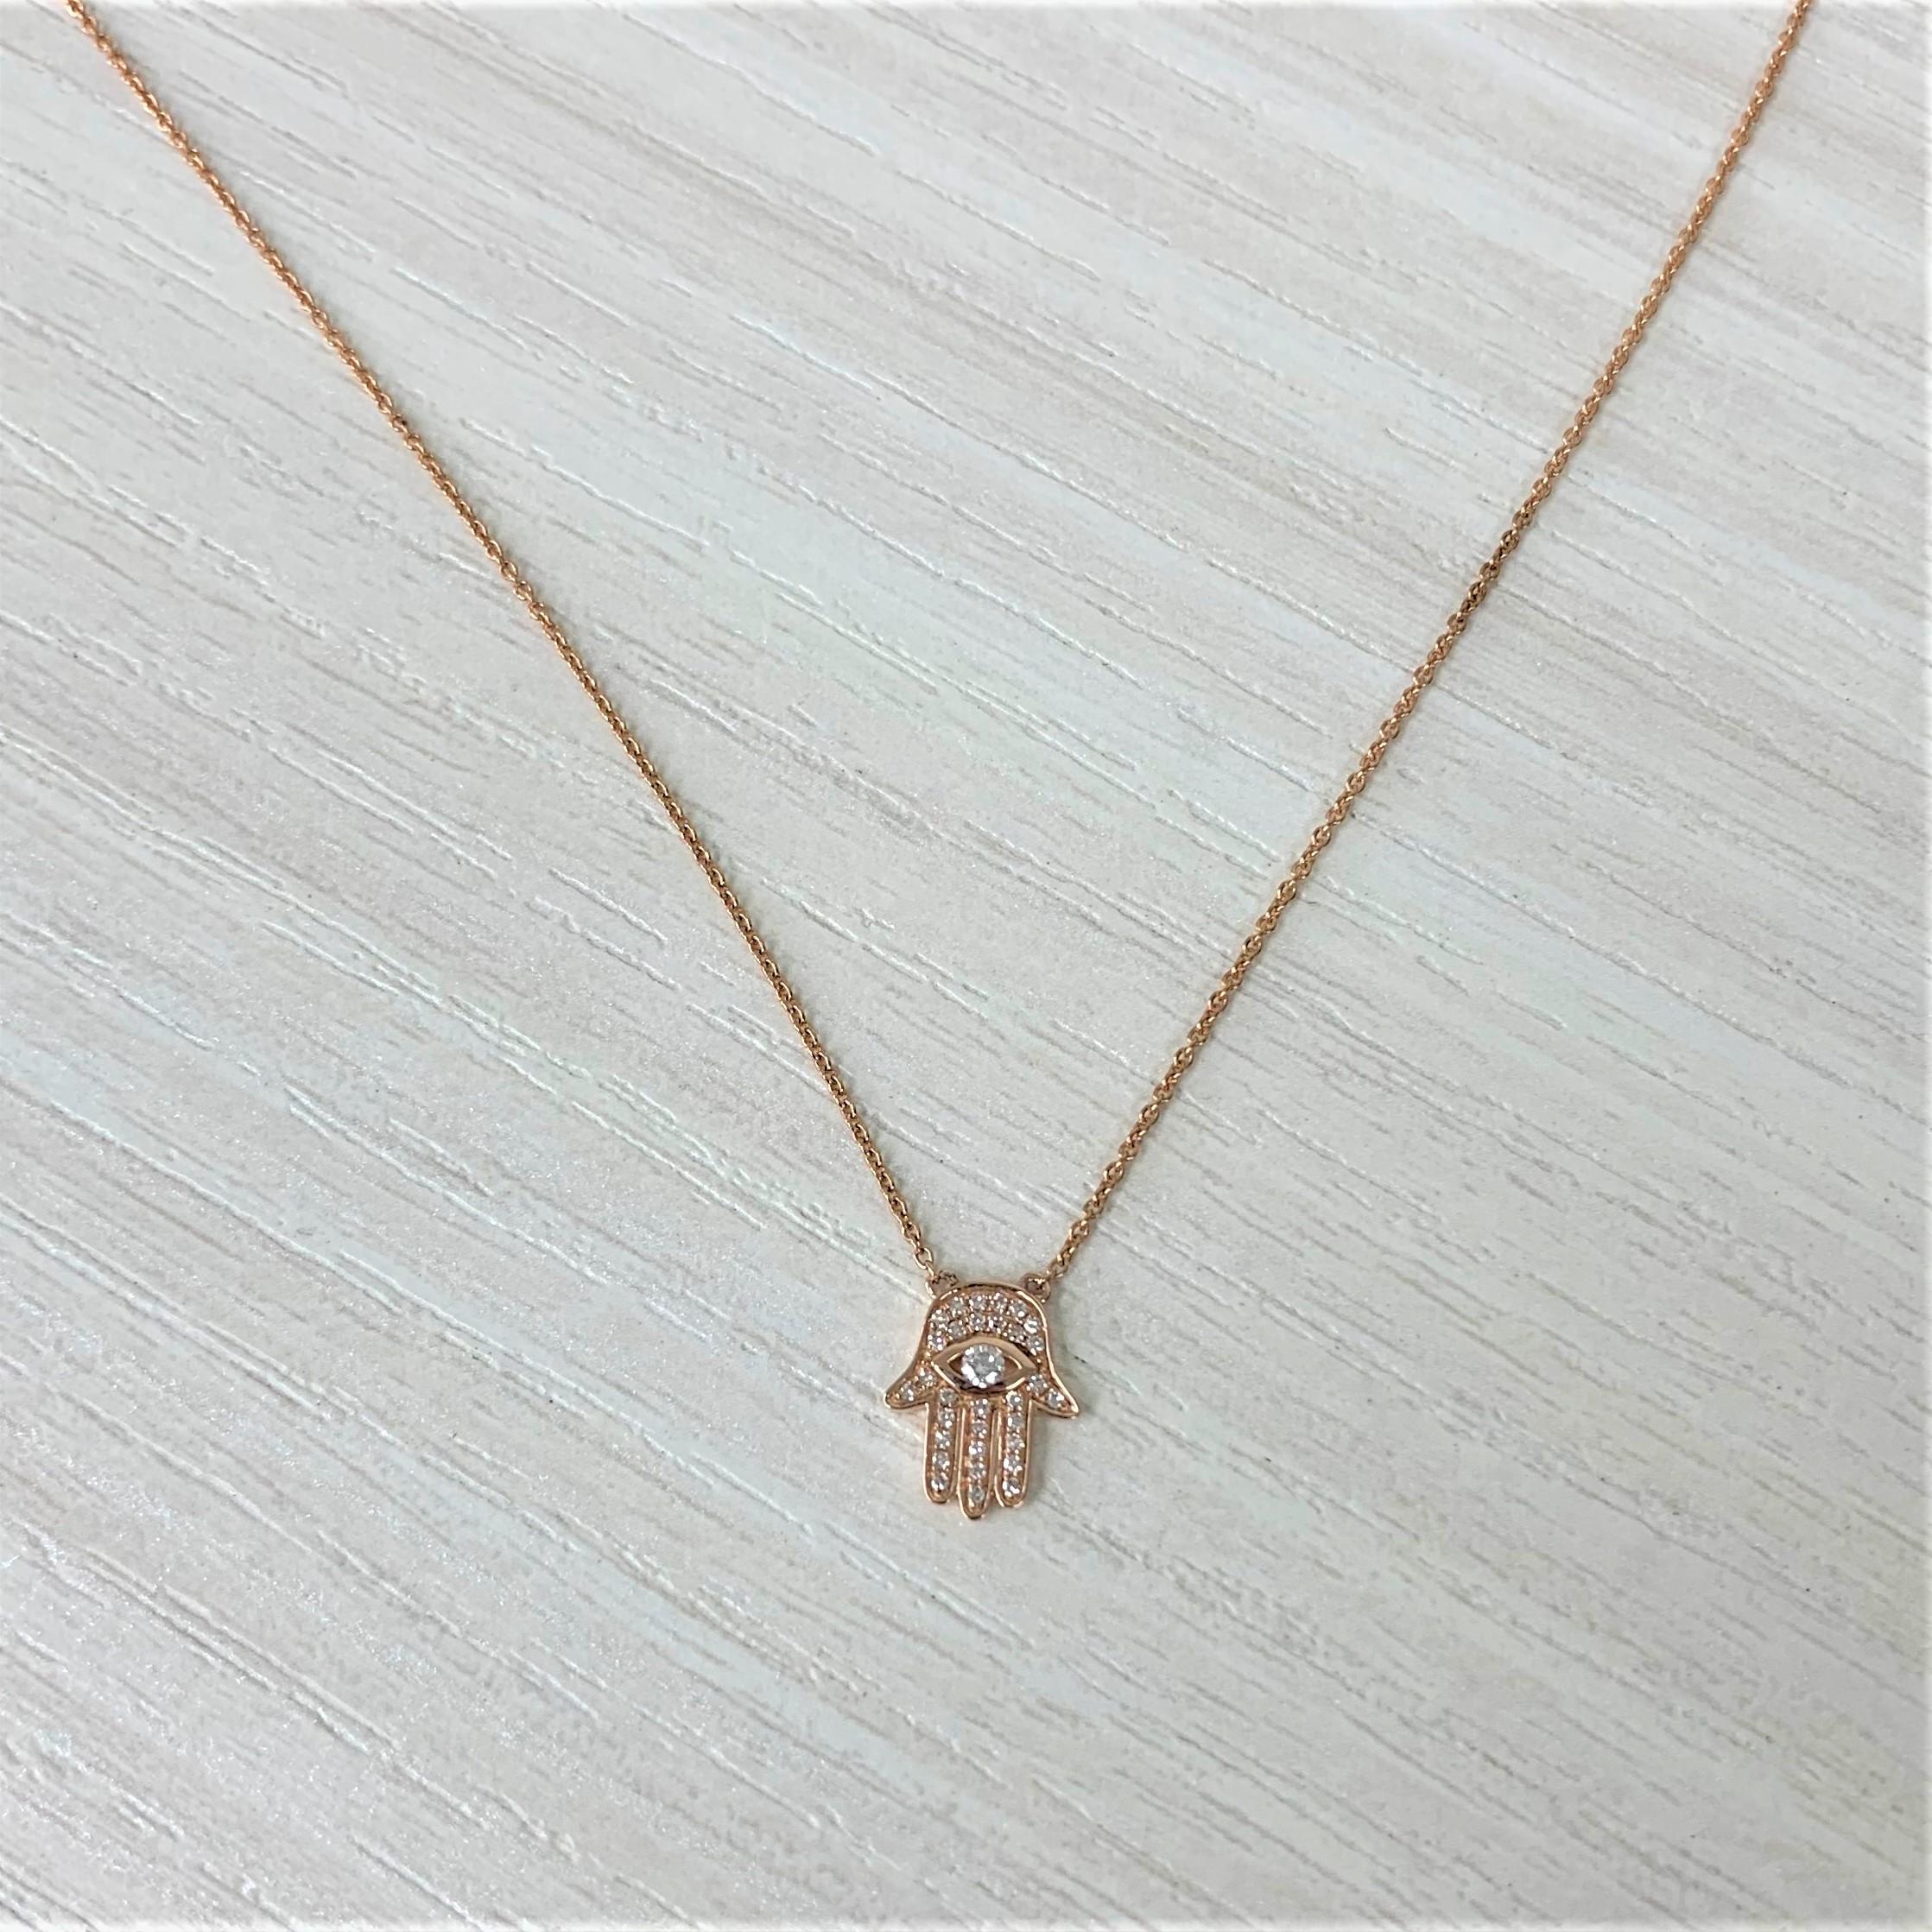 god's hand necklace